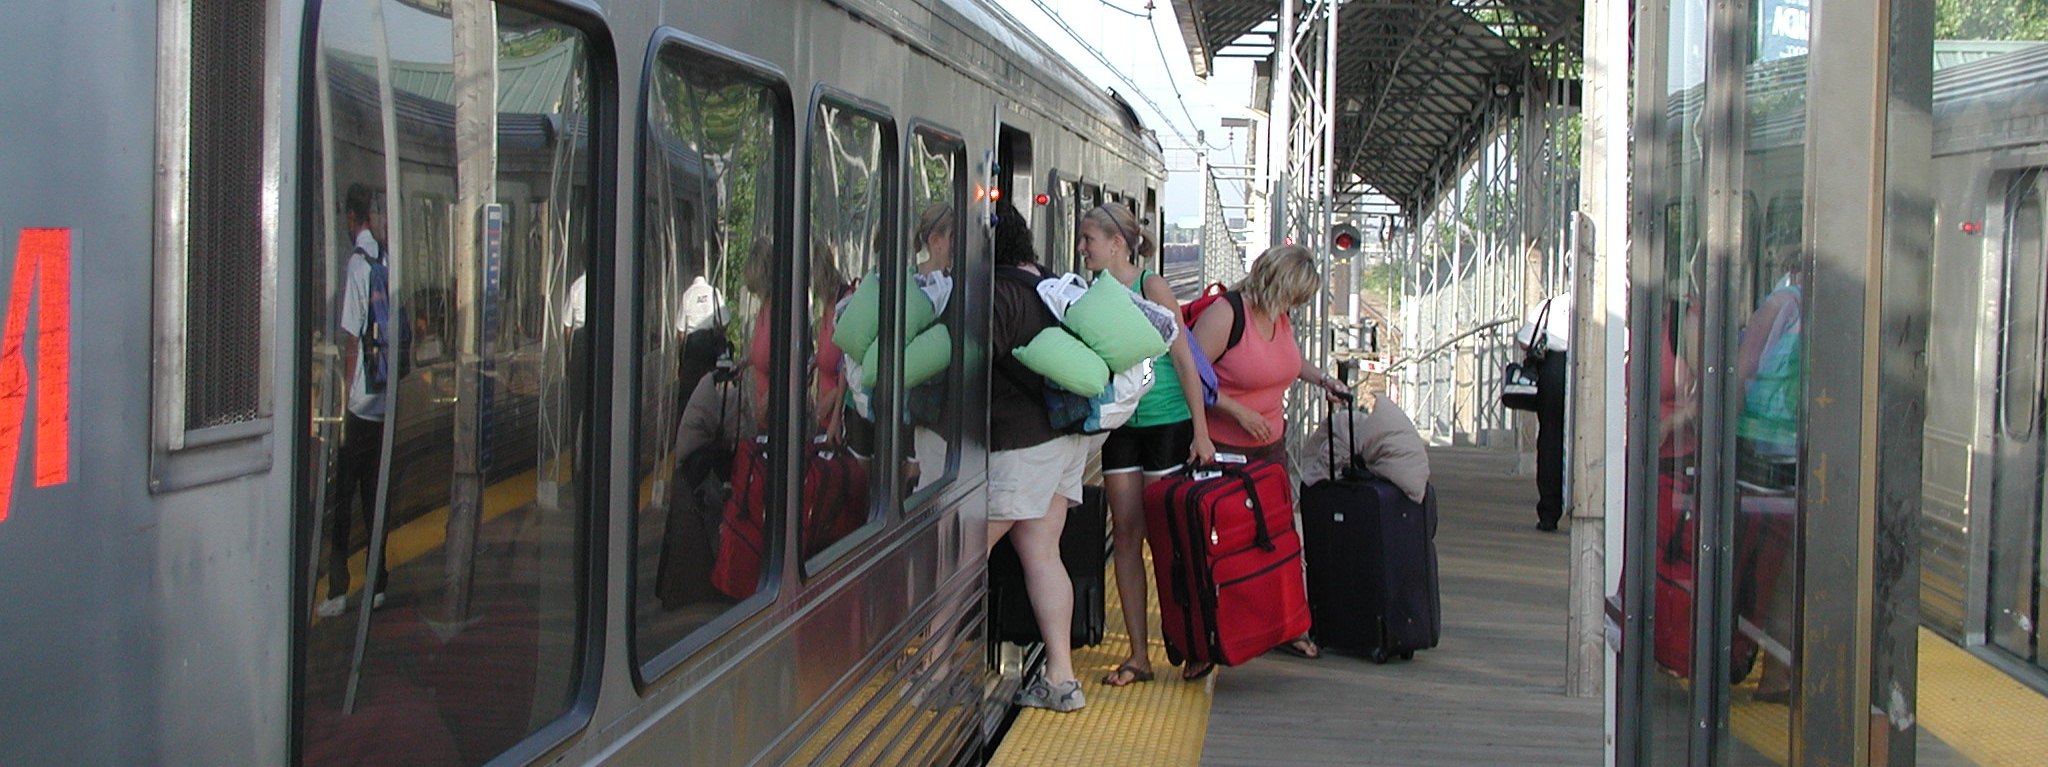  Board approves fare increases to balance 2016 budget